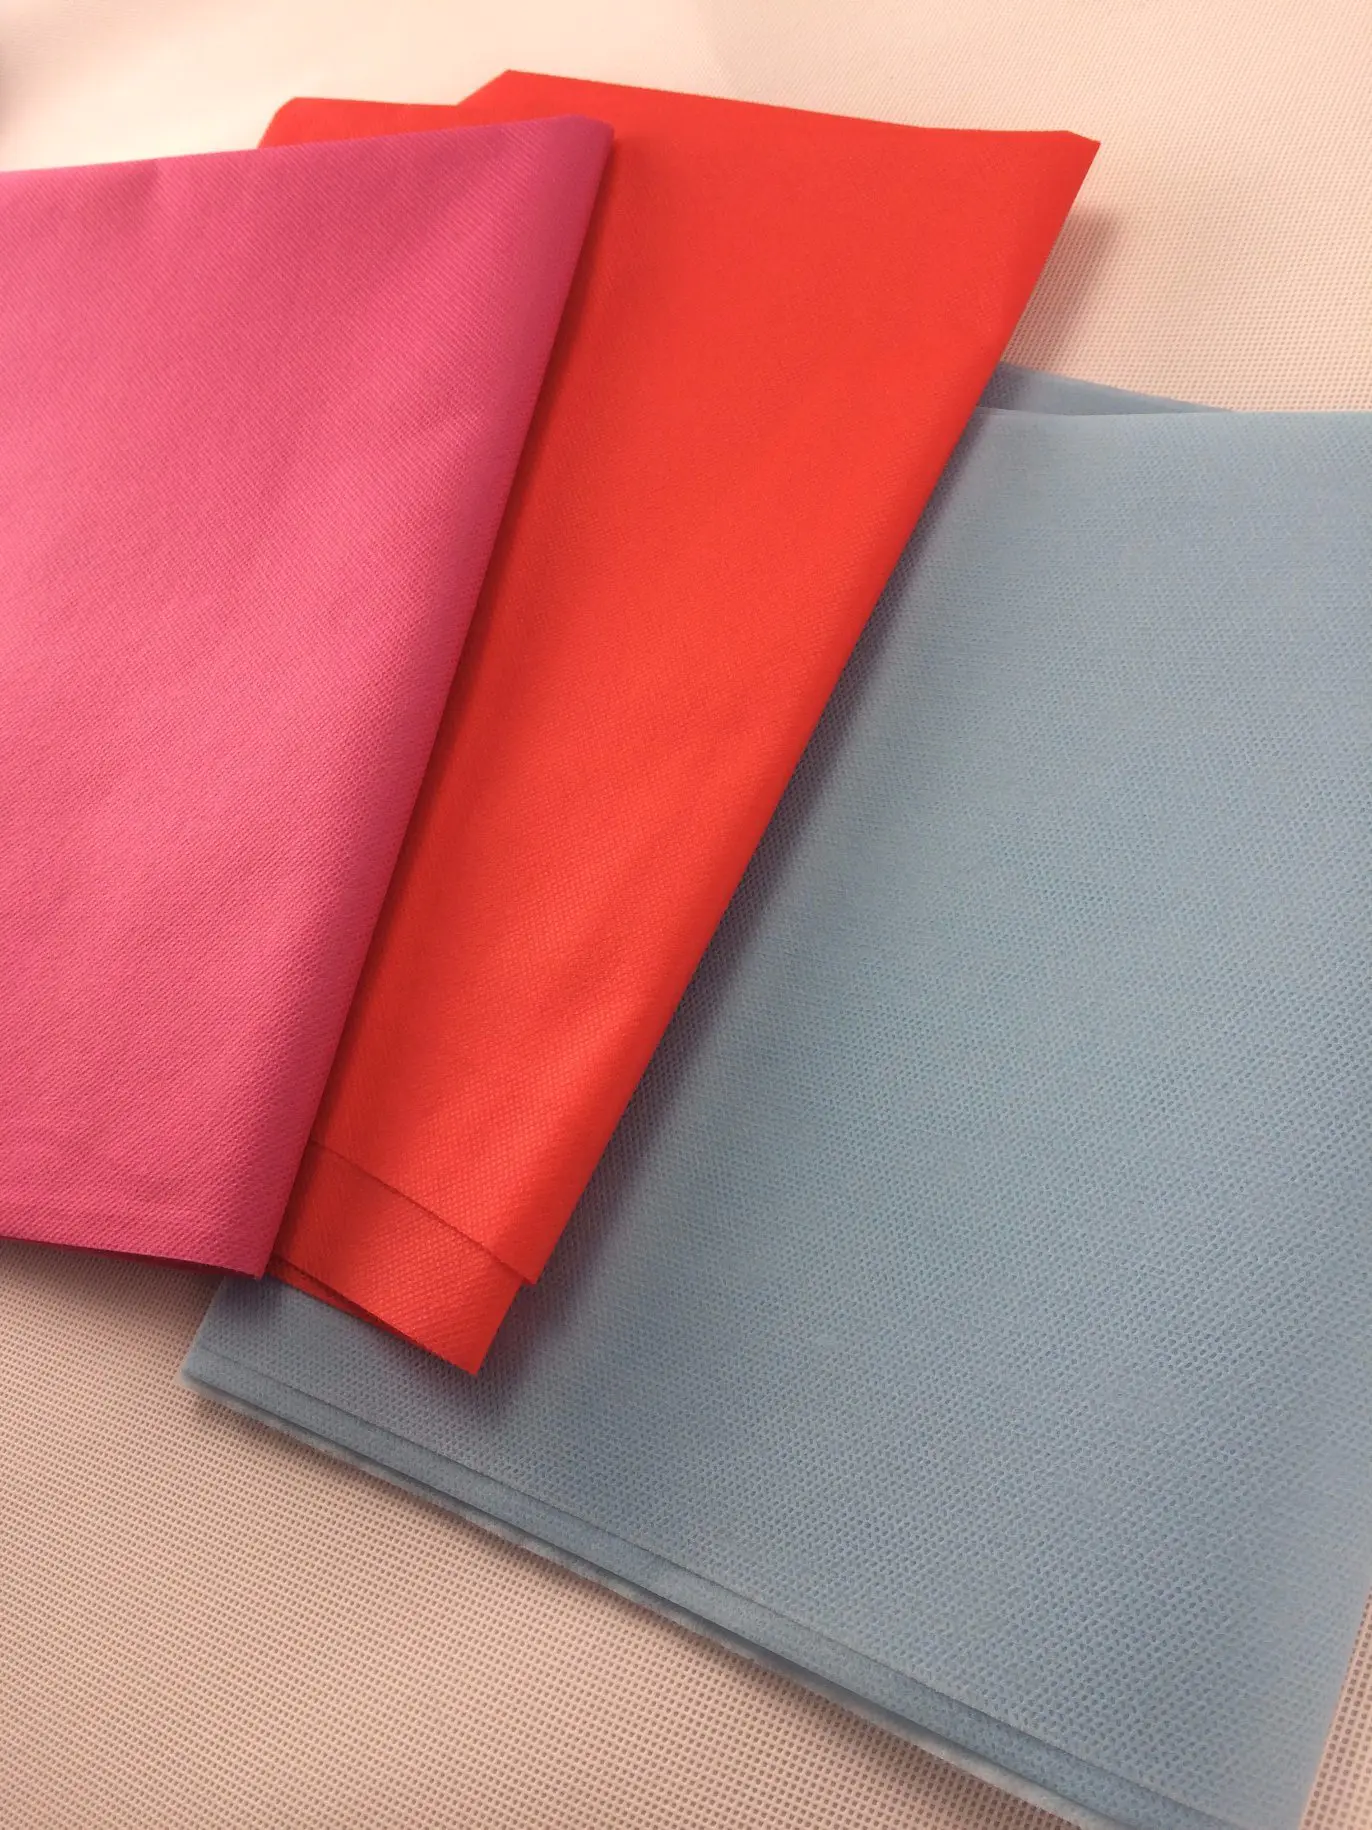 Fabric Companies in China Different Kinds Colorful Nonwoven Fabric